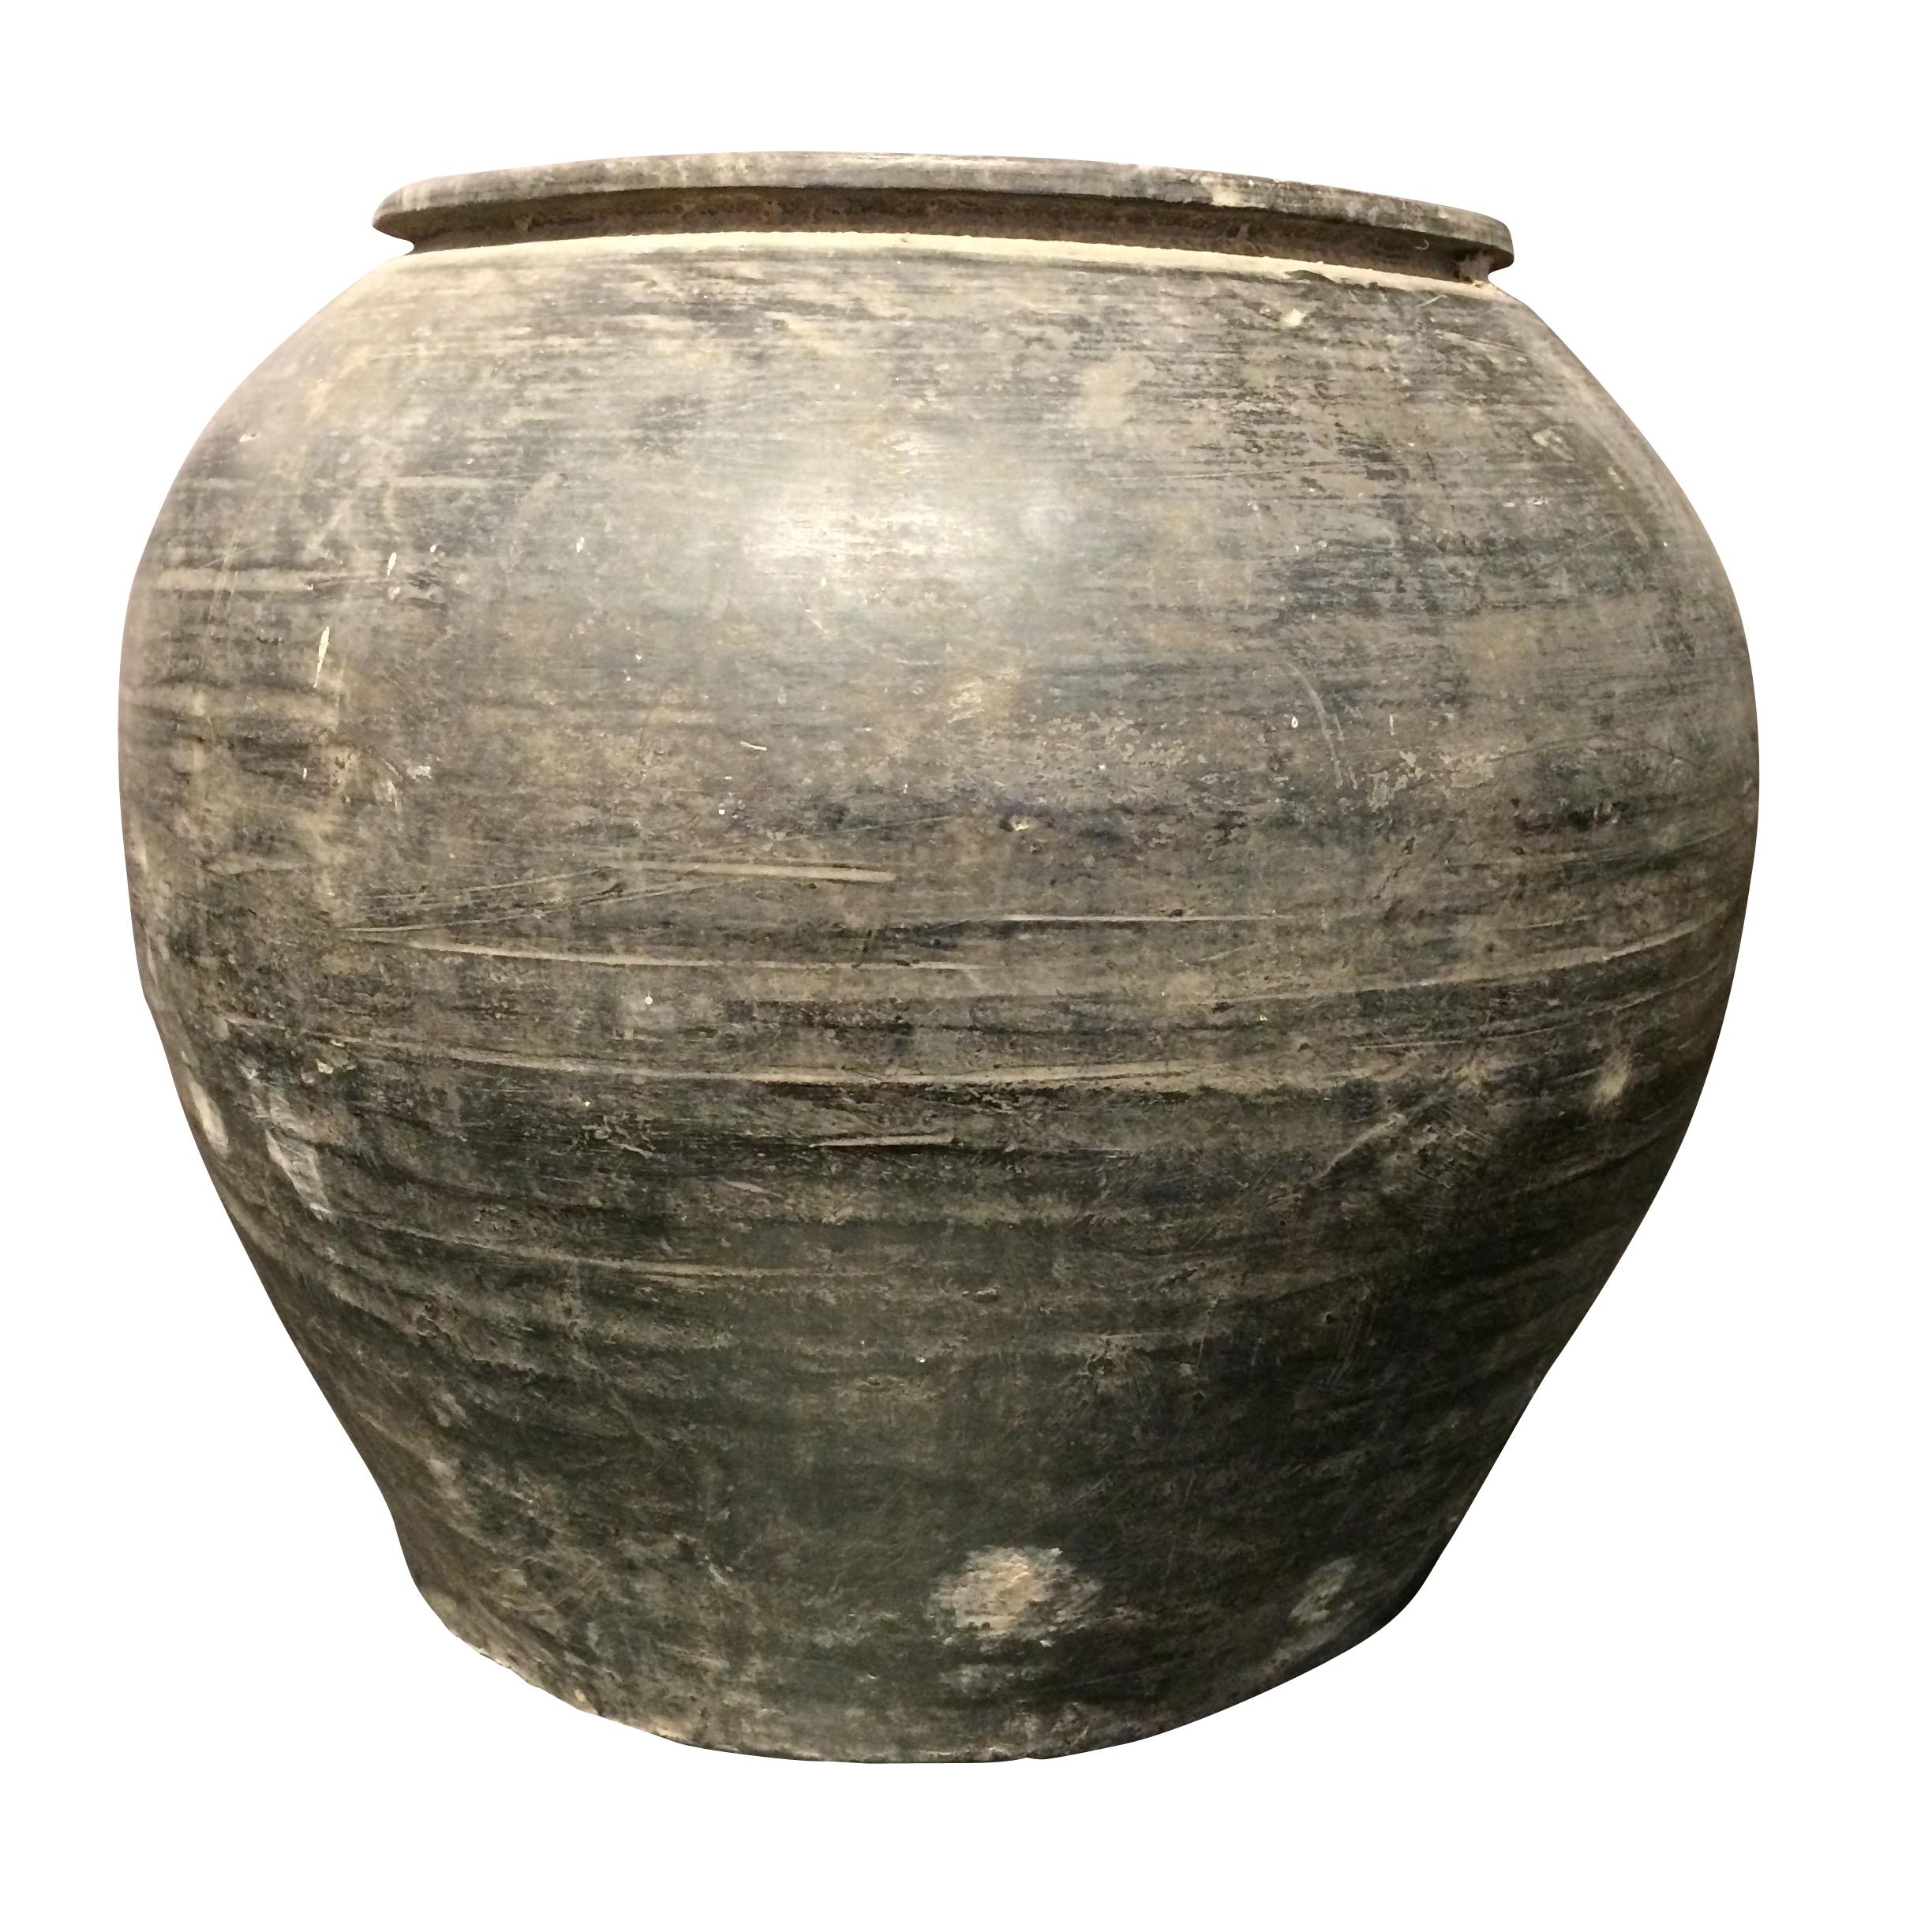 Late 20th century Chinese charcoal terracotta large food vessel.
Four without handles are available.
Measurements are 13